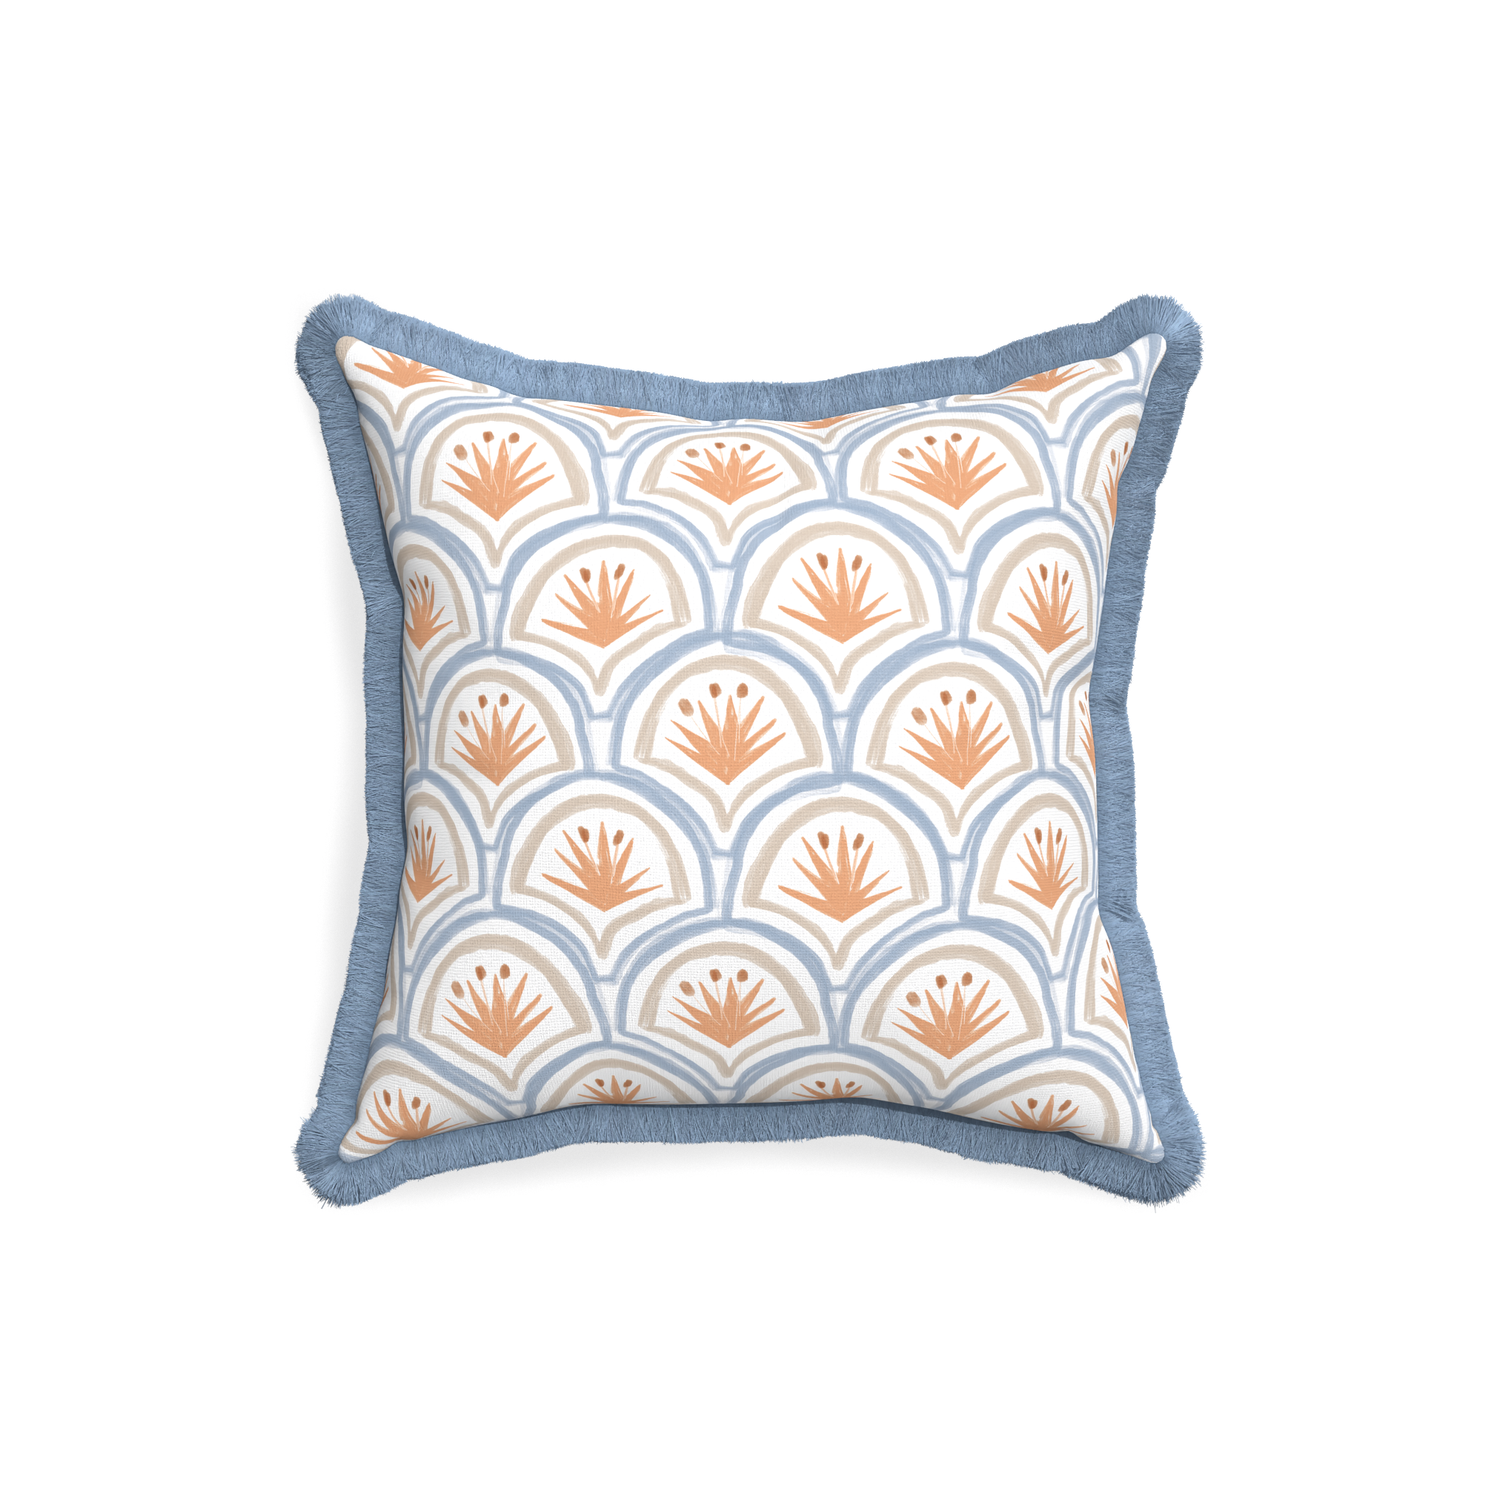 18-square thatcher apricot custom art deco palm patternpillow with sky fringe on white background